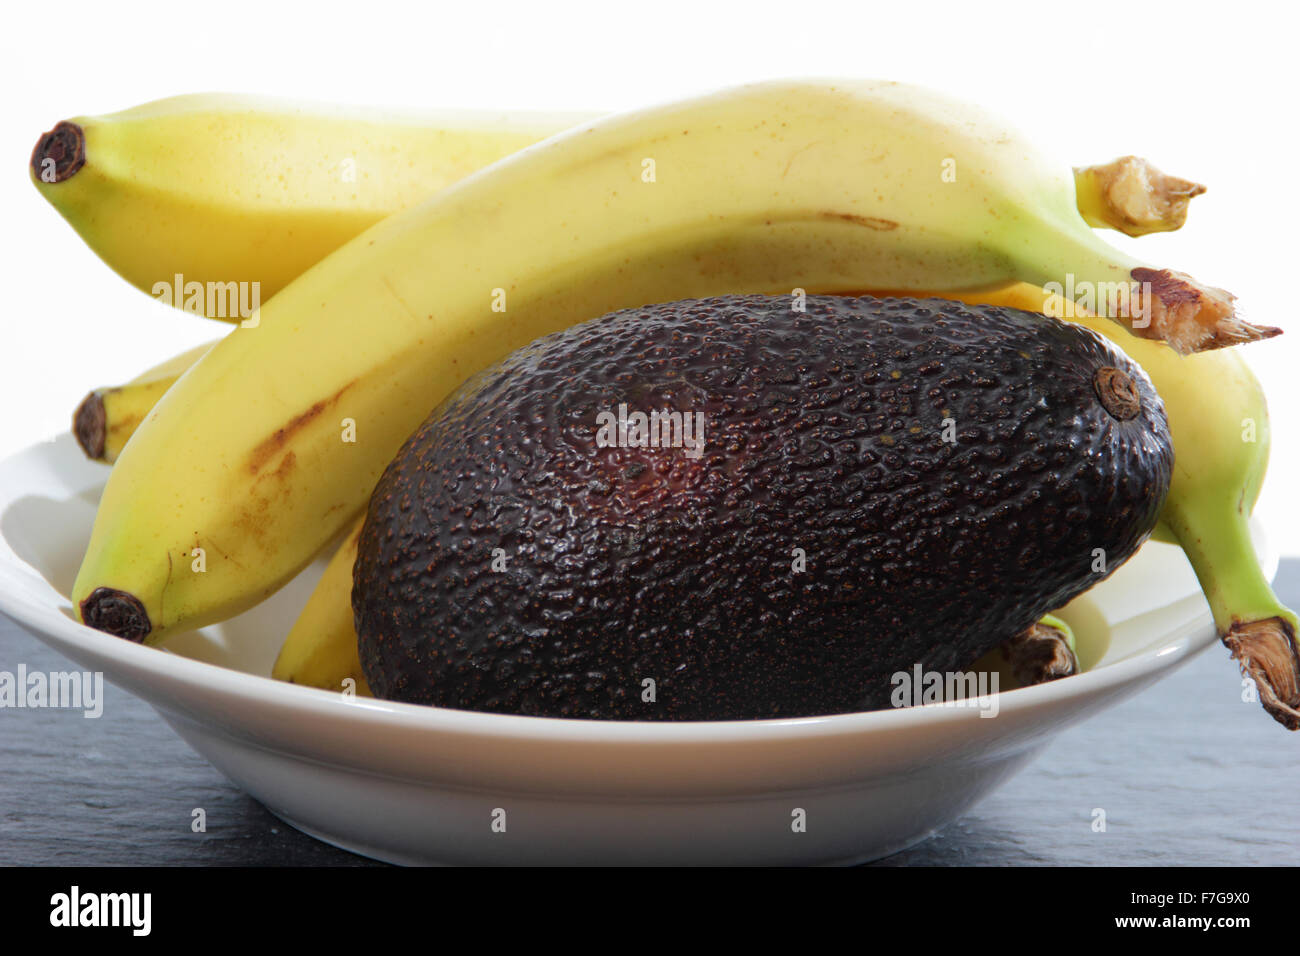 Bananas in a bowl with an avocado to hasten the ripening process - domestic setting , UK Stock Photo